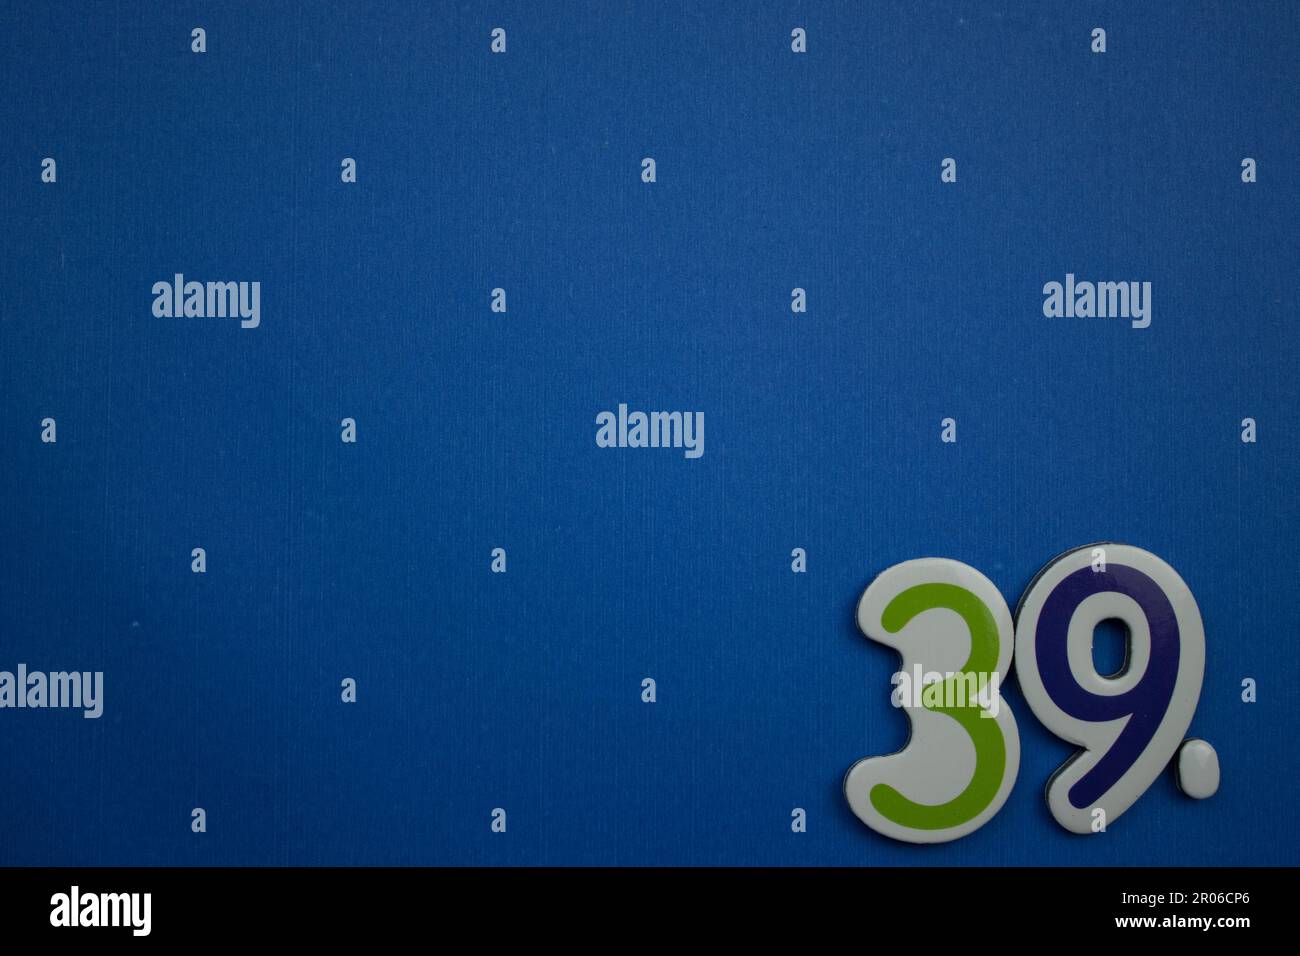 The number 39, placed on the edge of a blue background, photographed from above, colored green and dark blue. Stock Photo